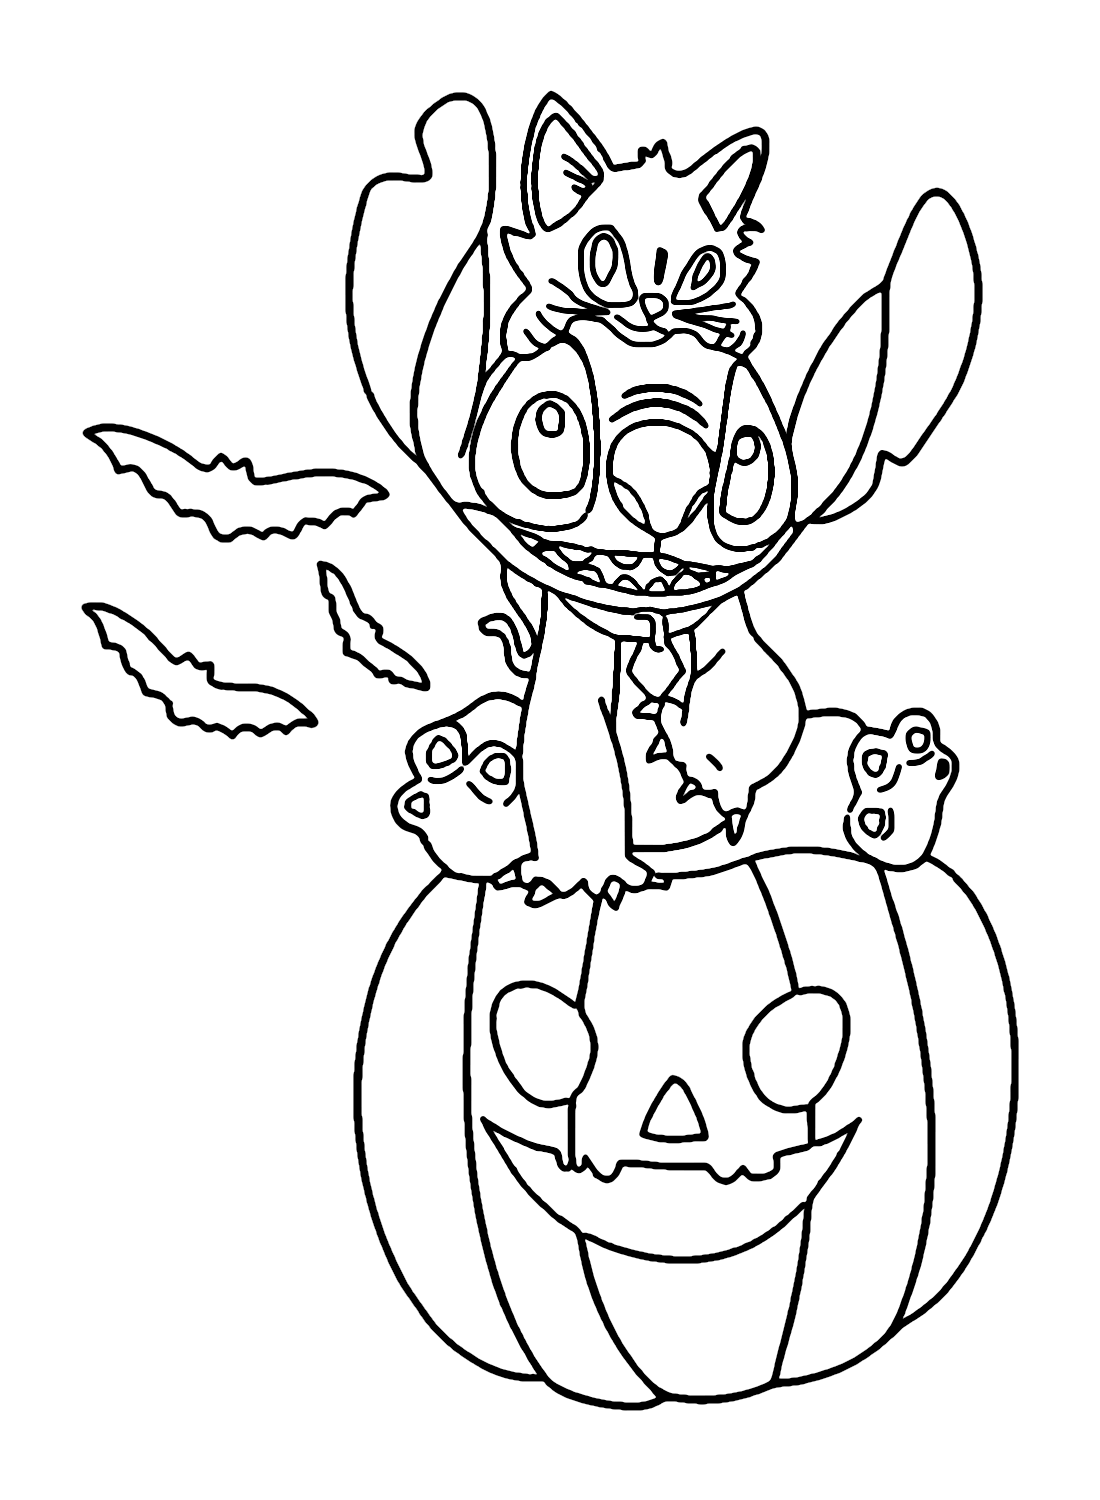 Halloween Stitch Coloring Pages Coloring Page